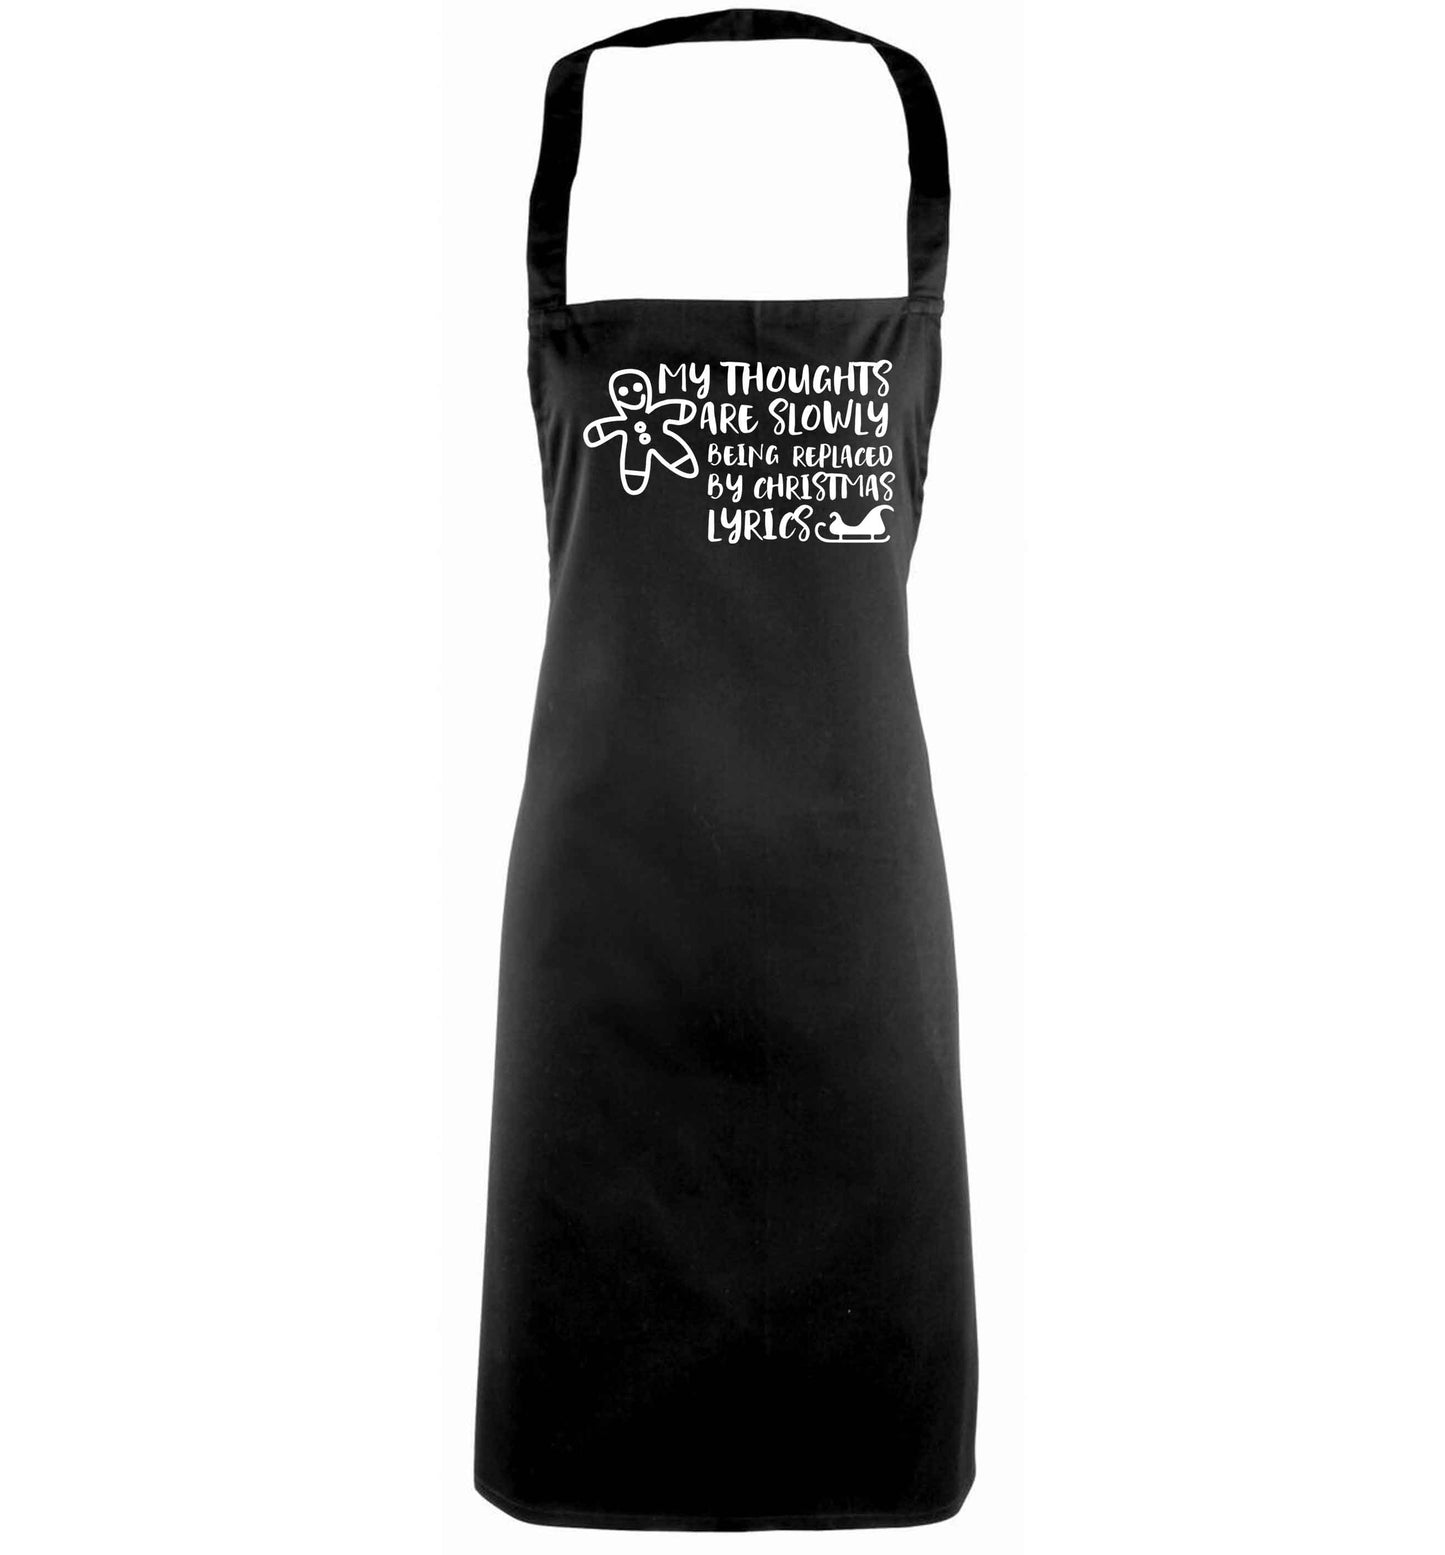 My thoughts are slowly being replaced by Christmas lyrics black apron